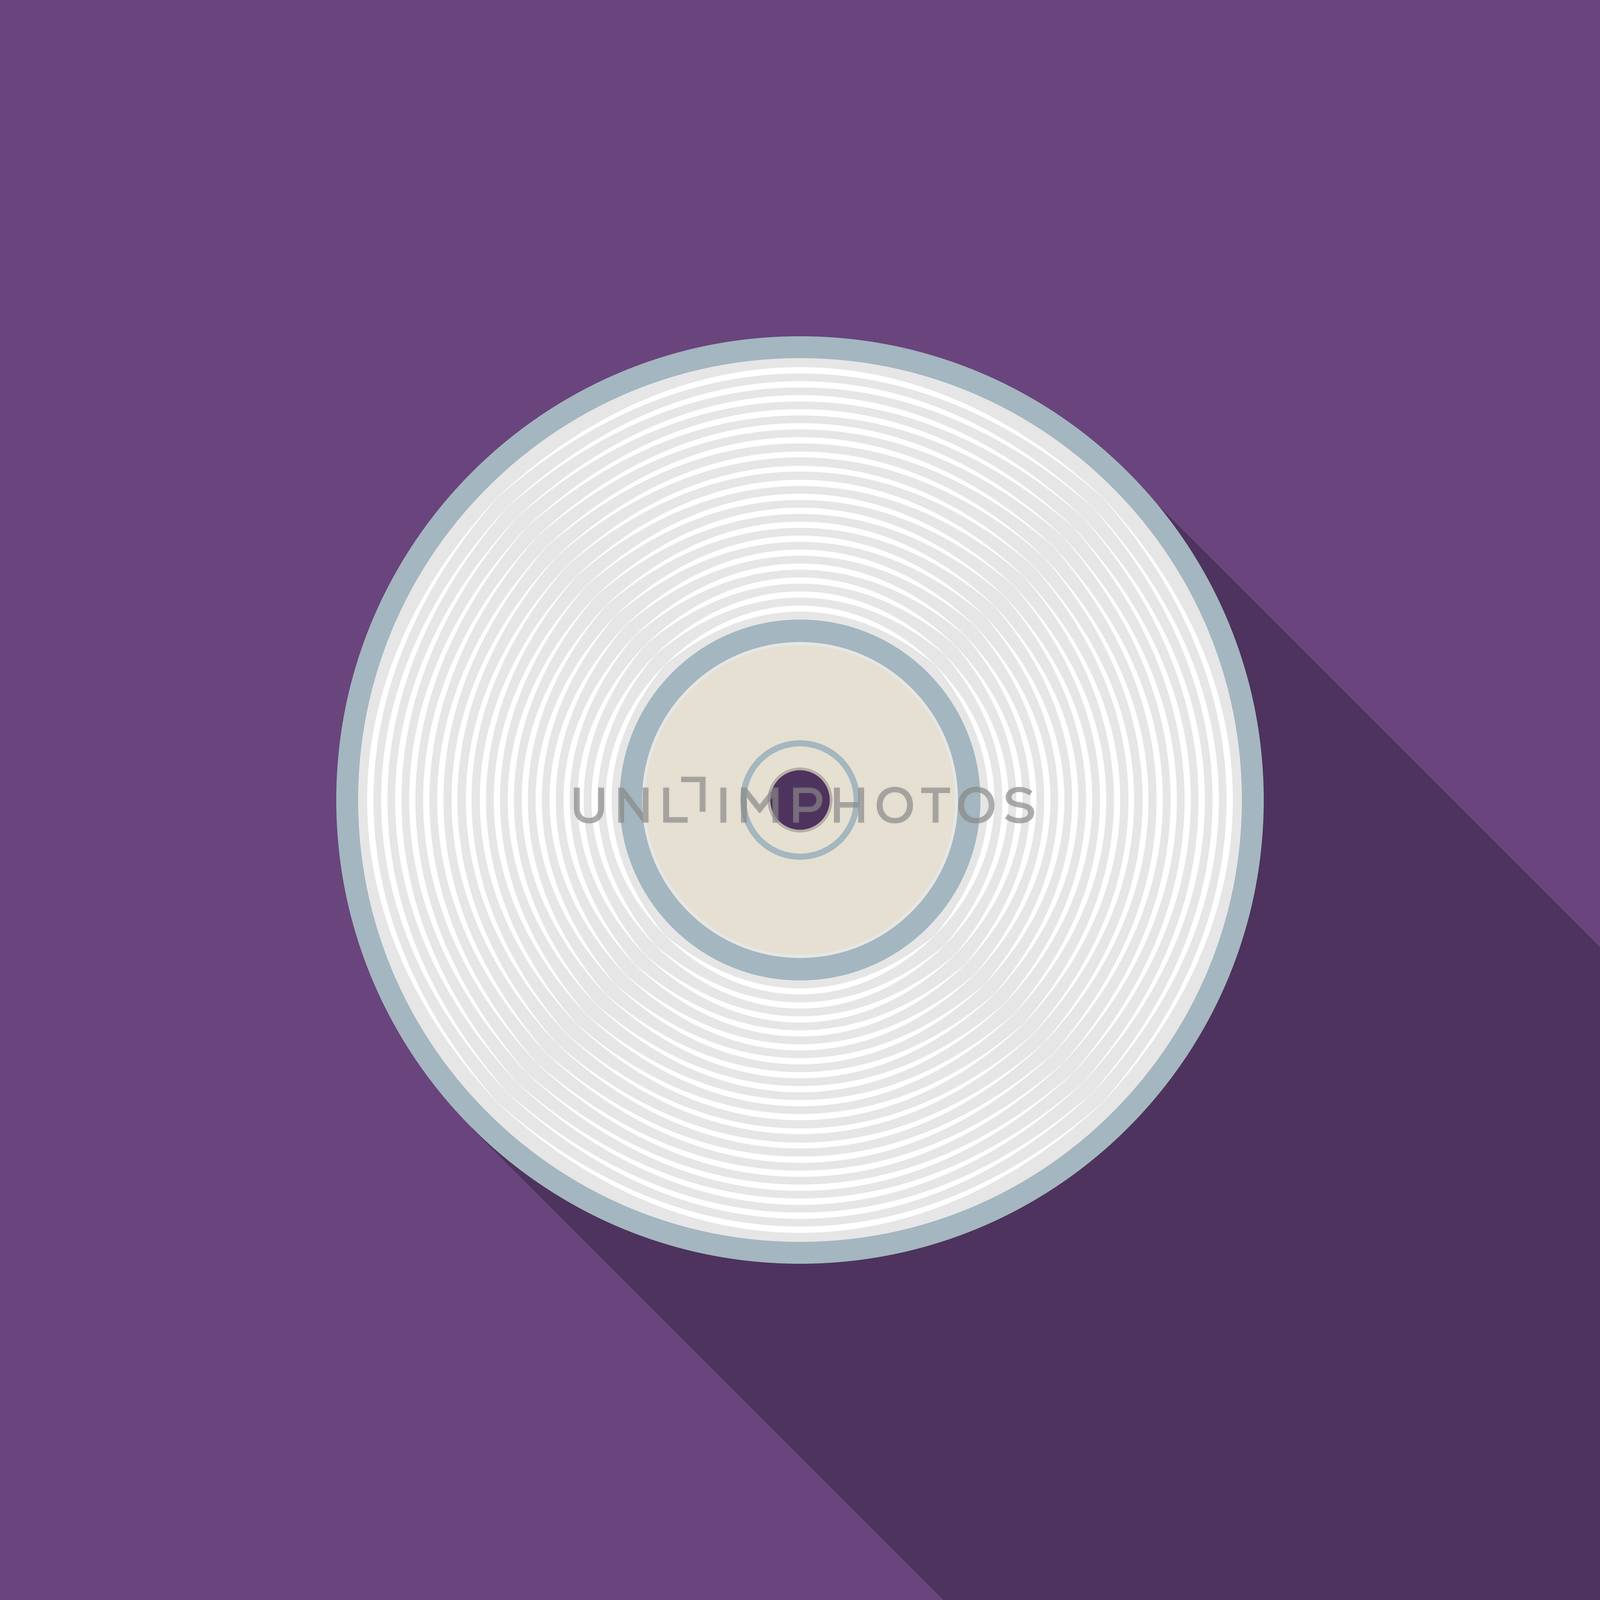 Flat design vector compact disc icon with long shadow by Lemon_workshop